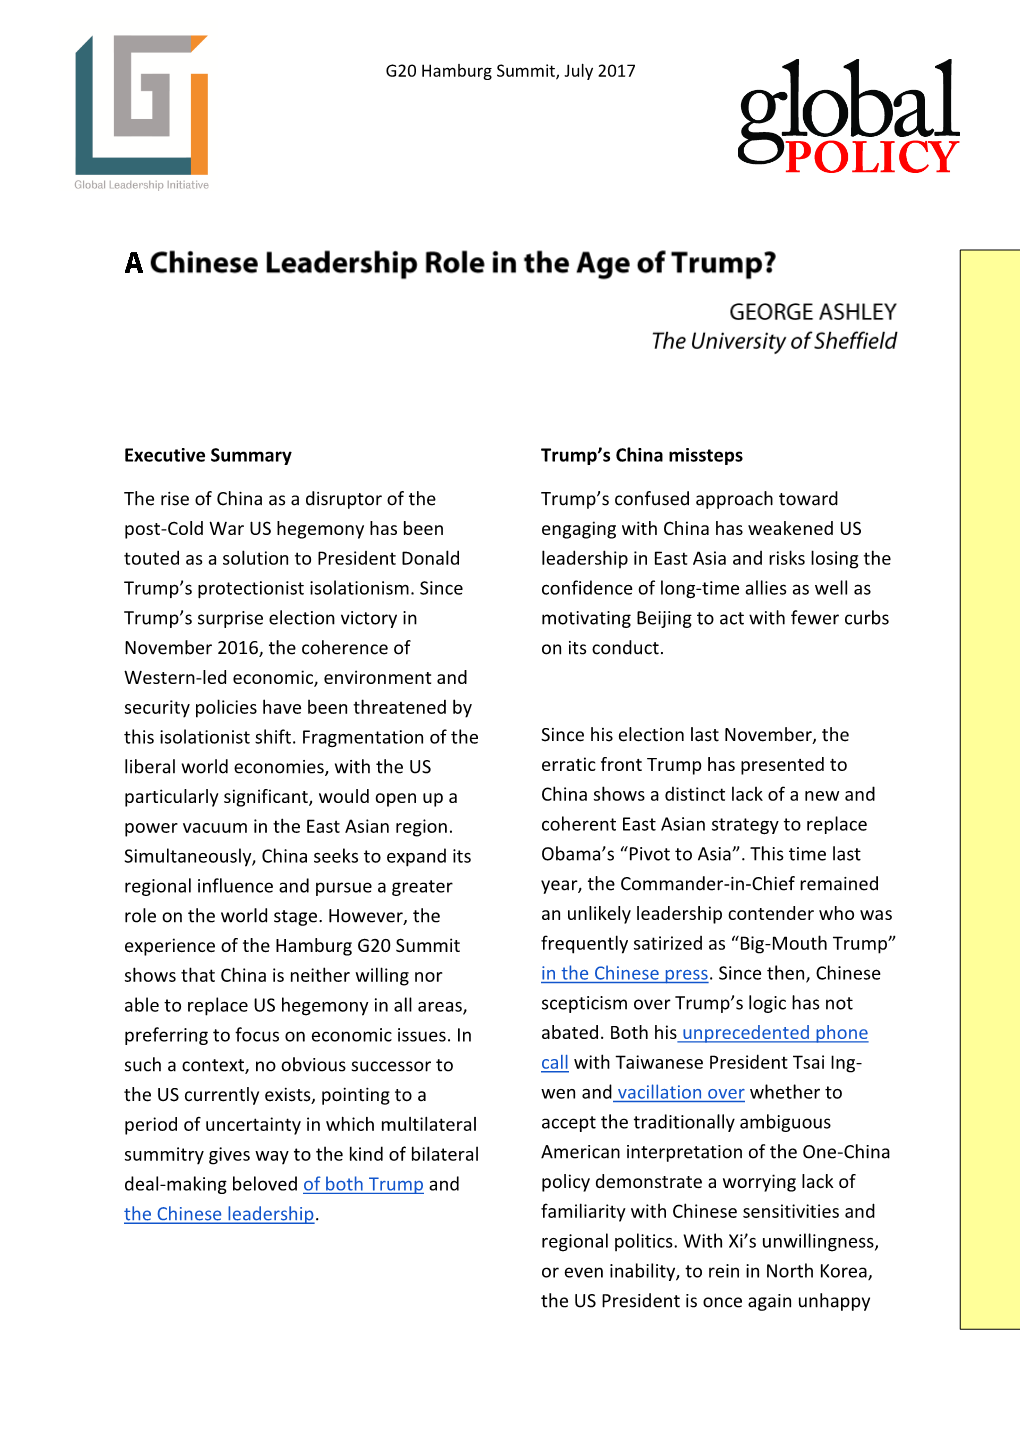 A Chinese Leadership Role in the Age of Trump